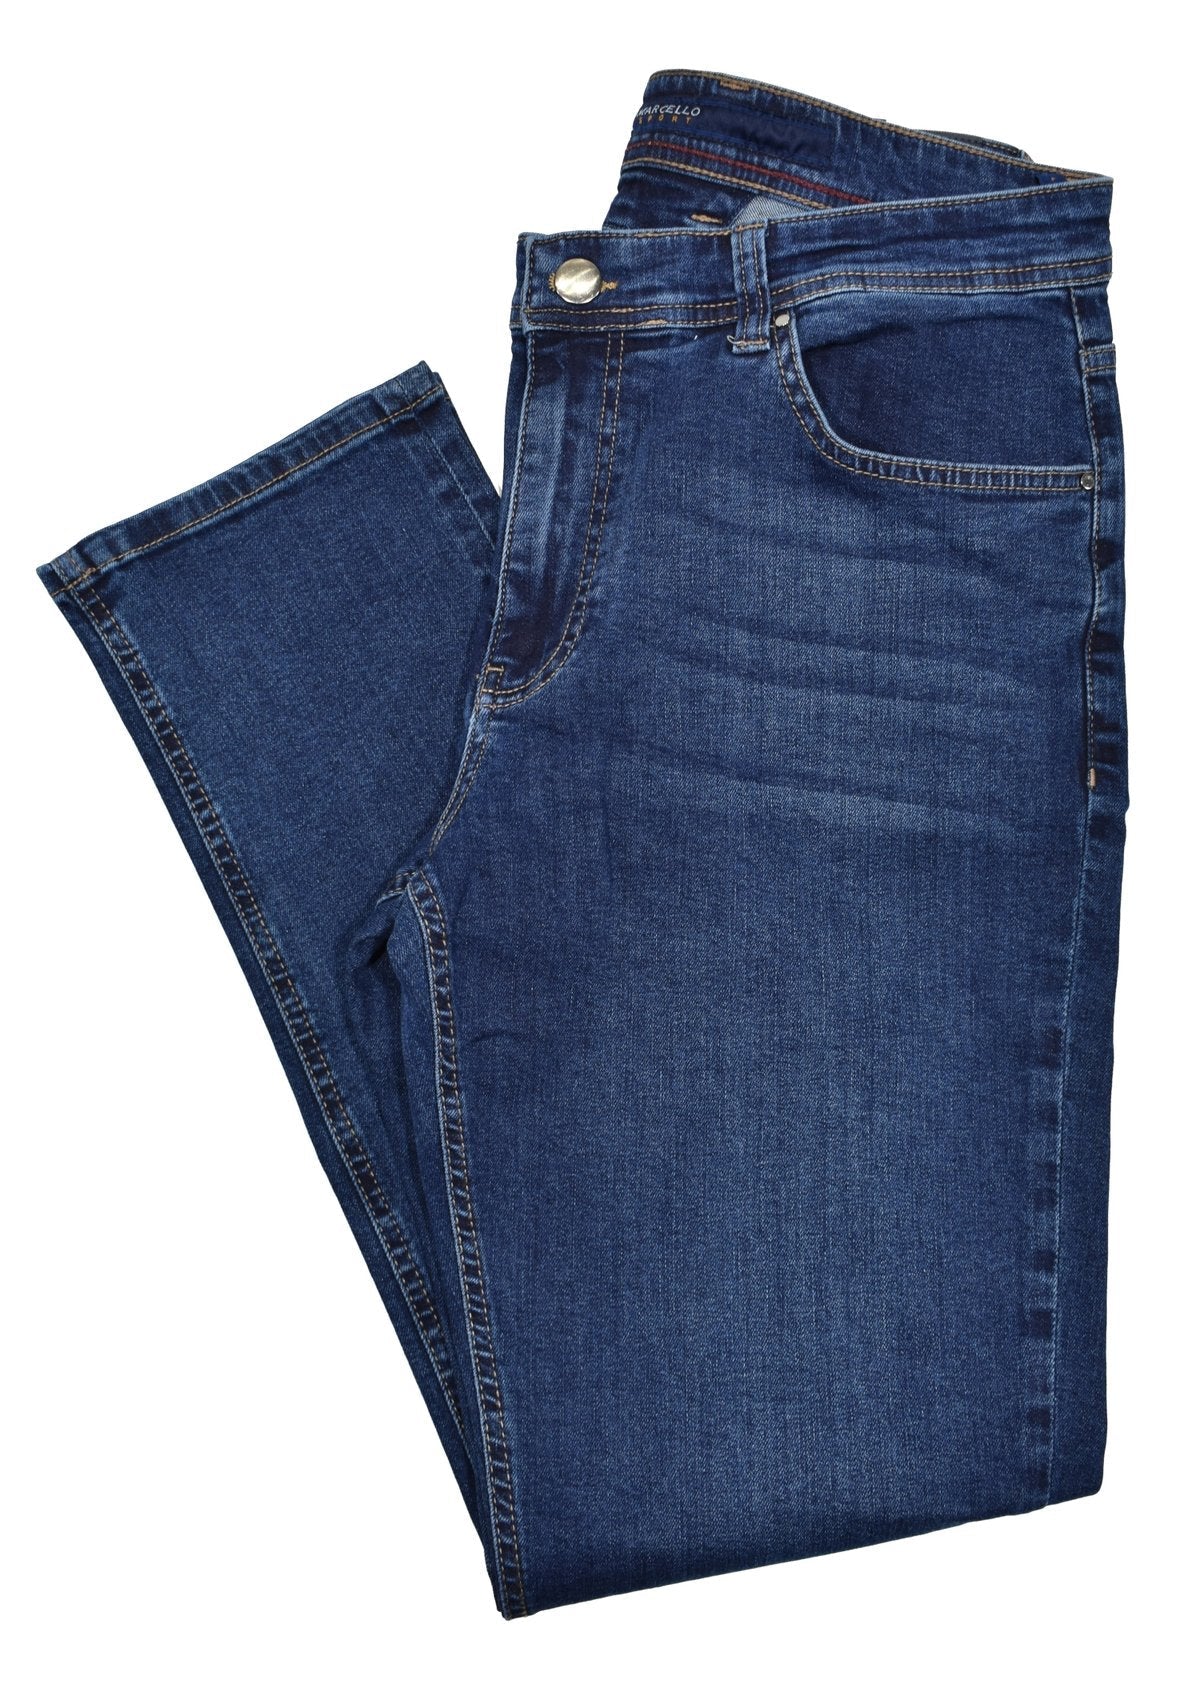 Upgrade your wardrobe with our new LP20 Denim jeans from Marcello. These lightweight washed denim jeans provide optimal comfort and support in all the right places for a perfect fit. With a slimmed leg and stretch for natural movement, you'll always look and feel your best.  Marcello Sport Mens Denim Jeans